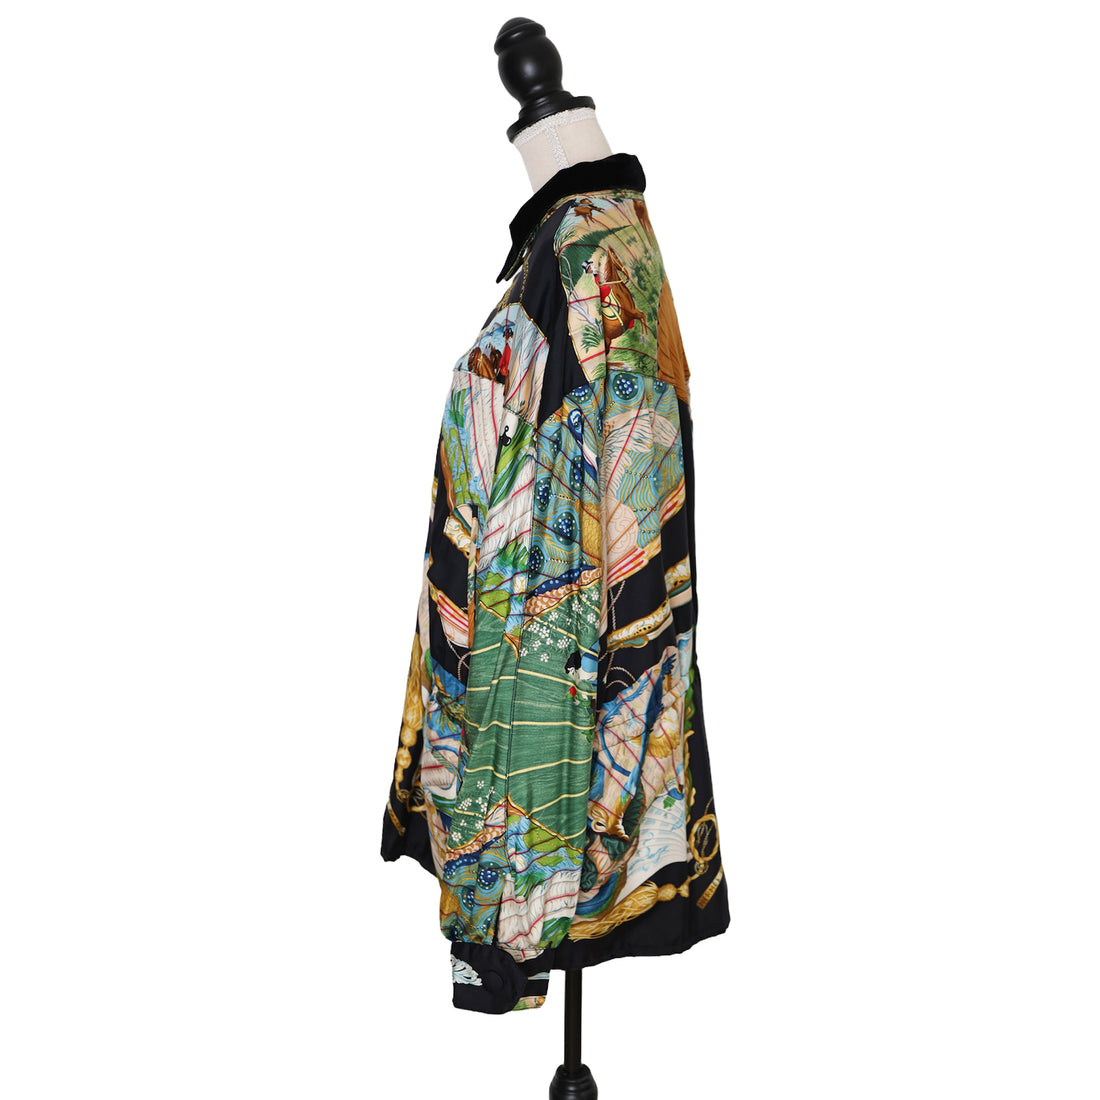 Hermès "Brise de Charme" reversible silk and velvet jacket with matching top